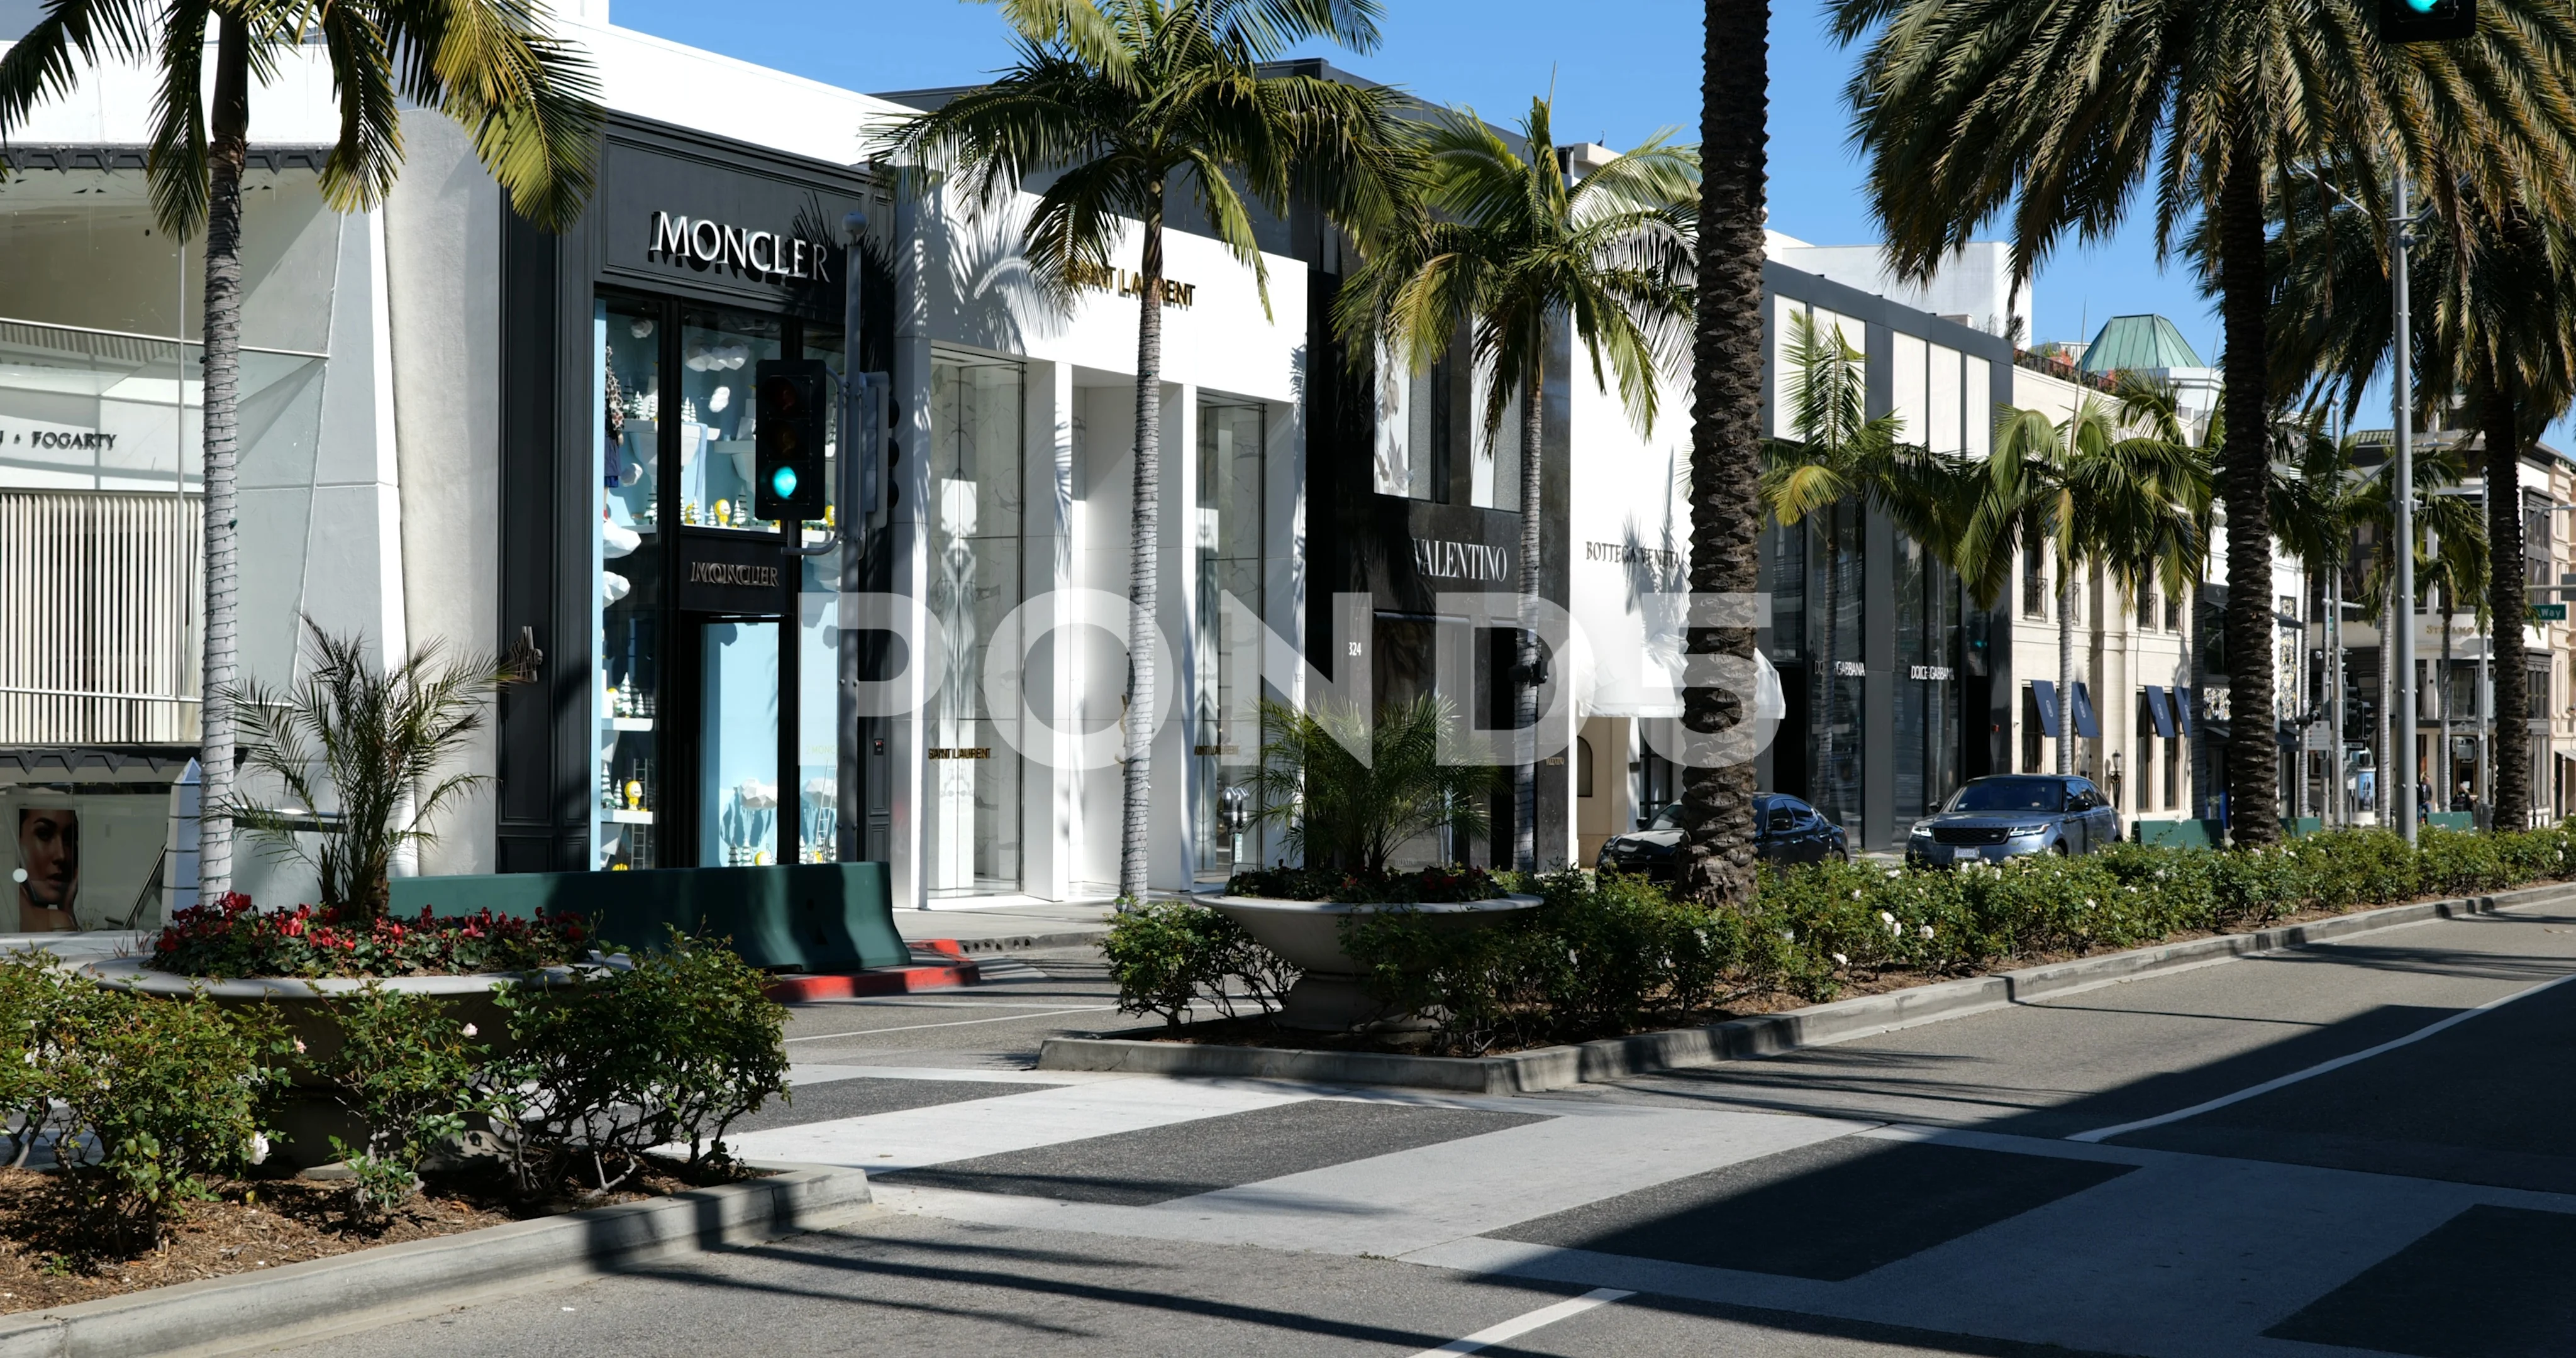 Chanel - Exclusive shops at Rodeo Drive , Stock Video